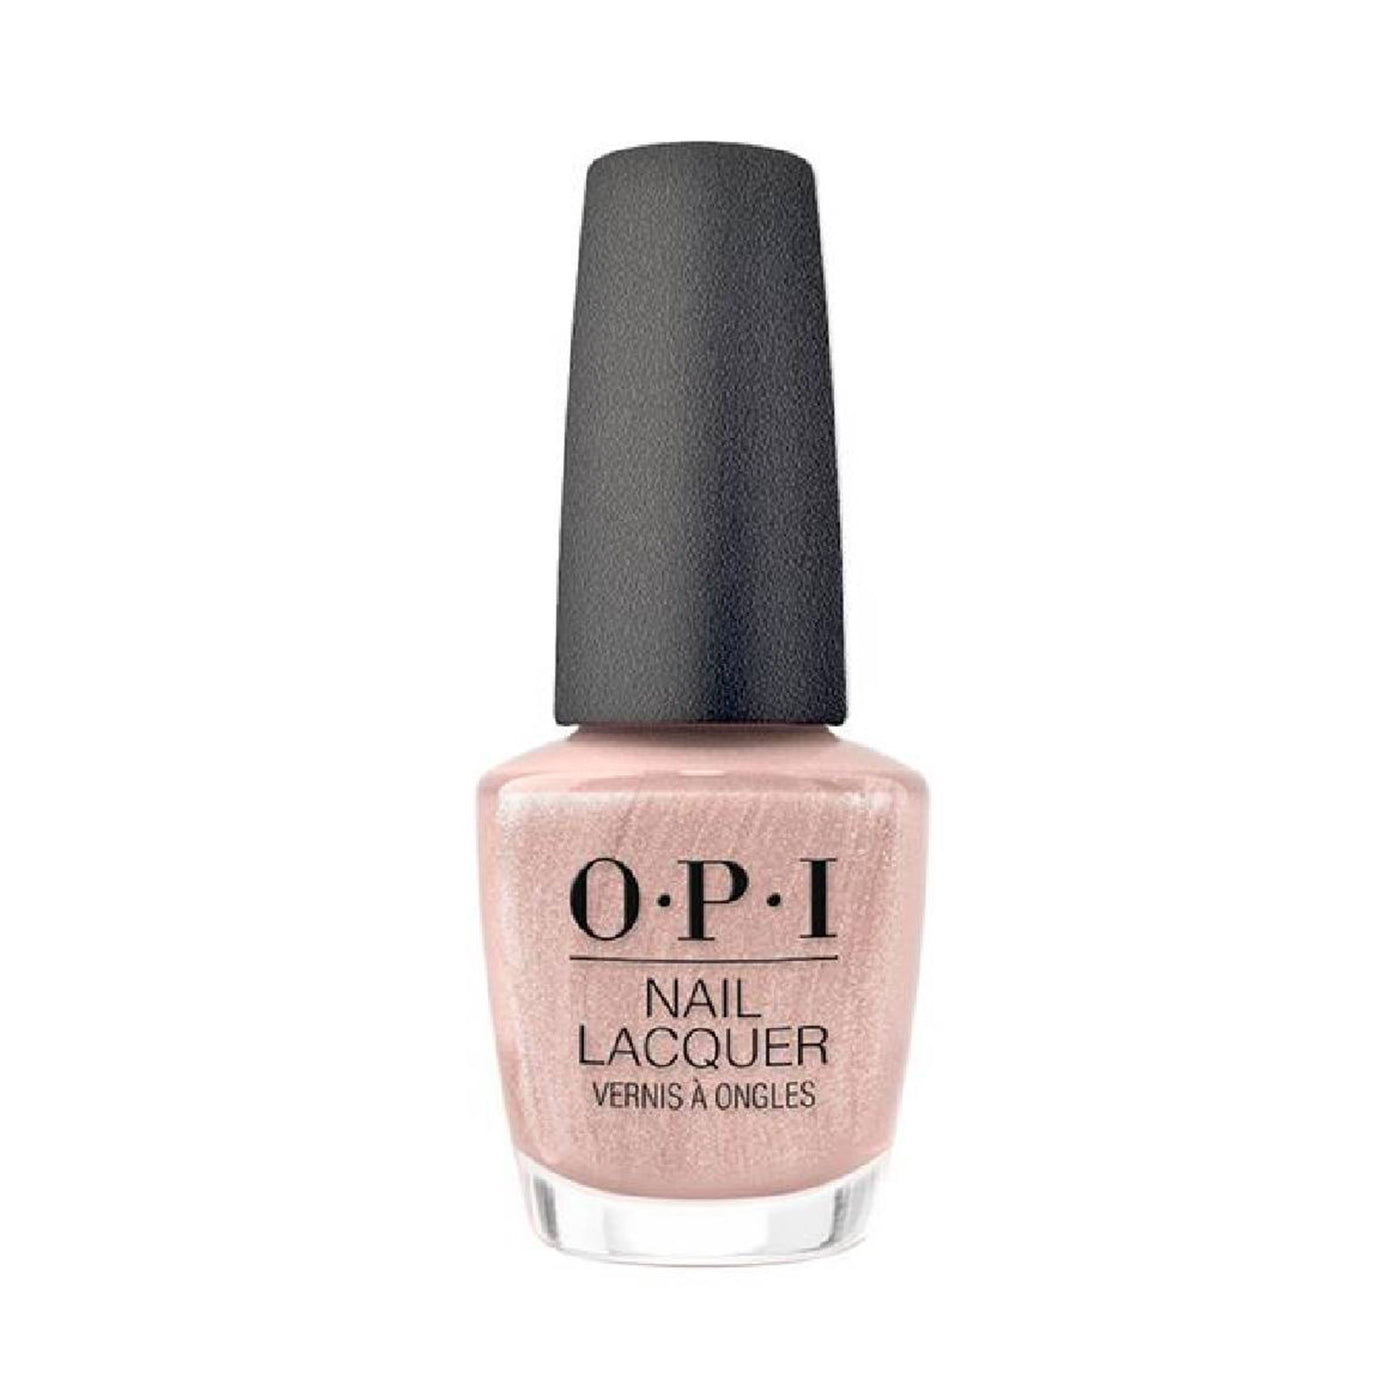 OPI Nail Polish NLL15 Made It To the Seventh Hill! 15ml